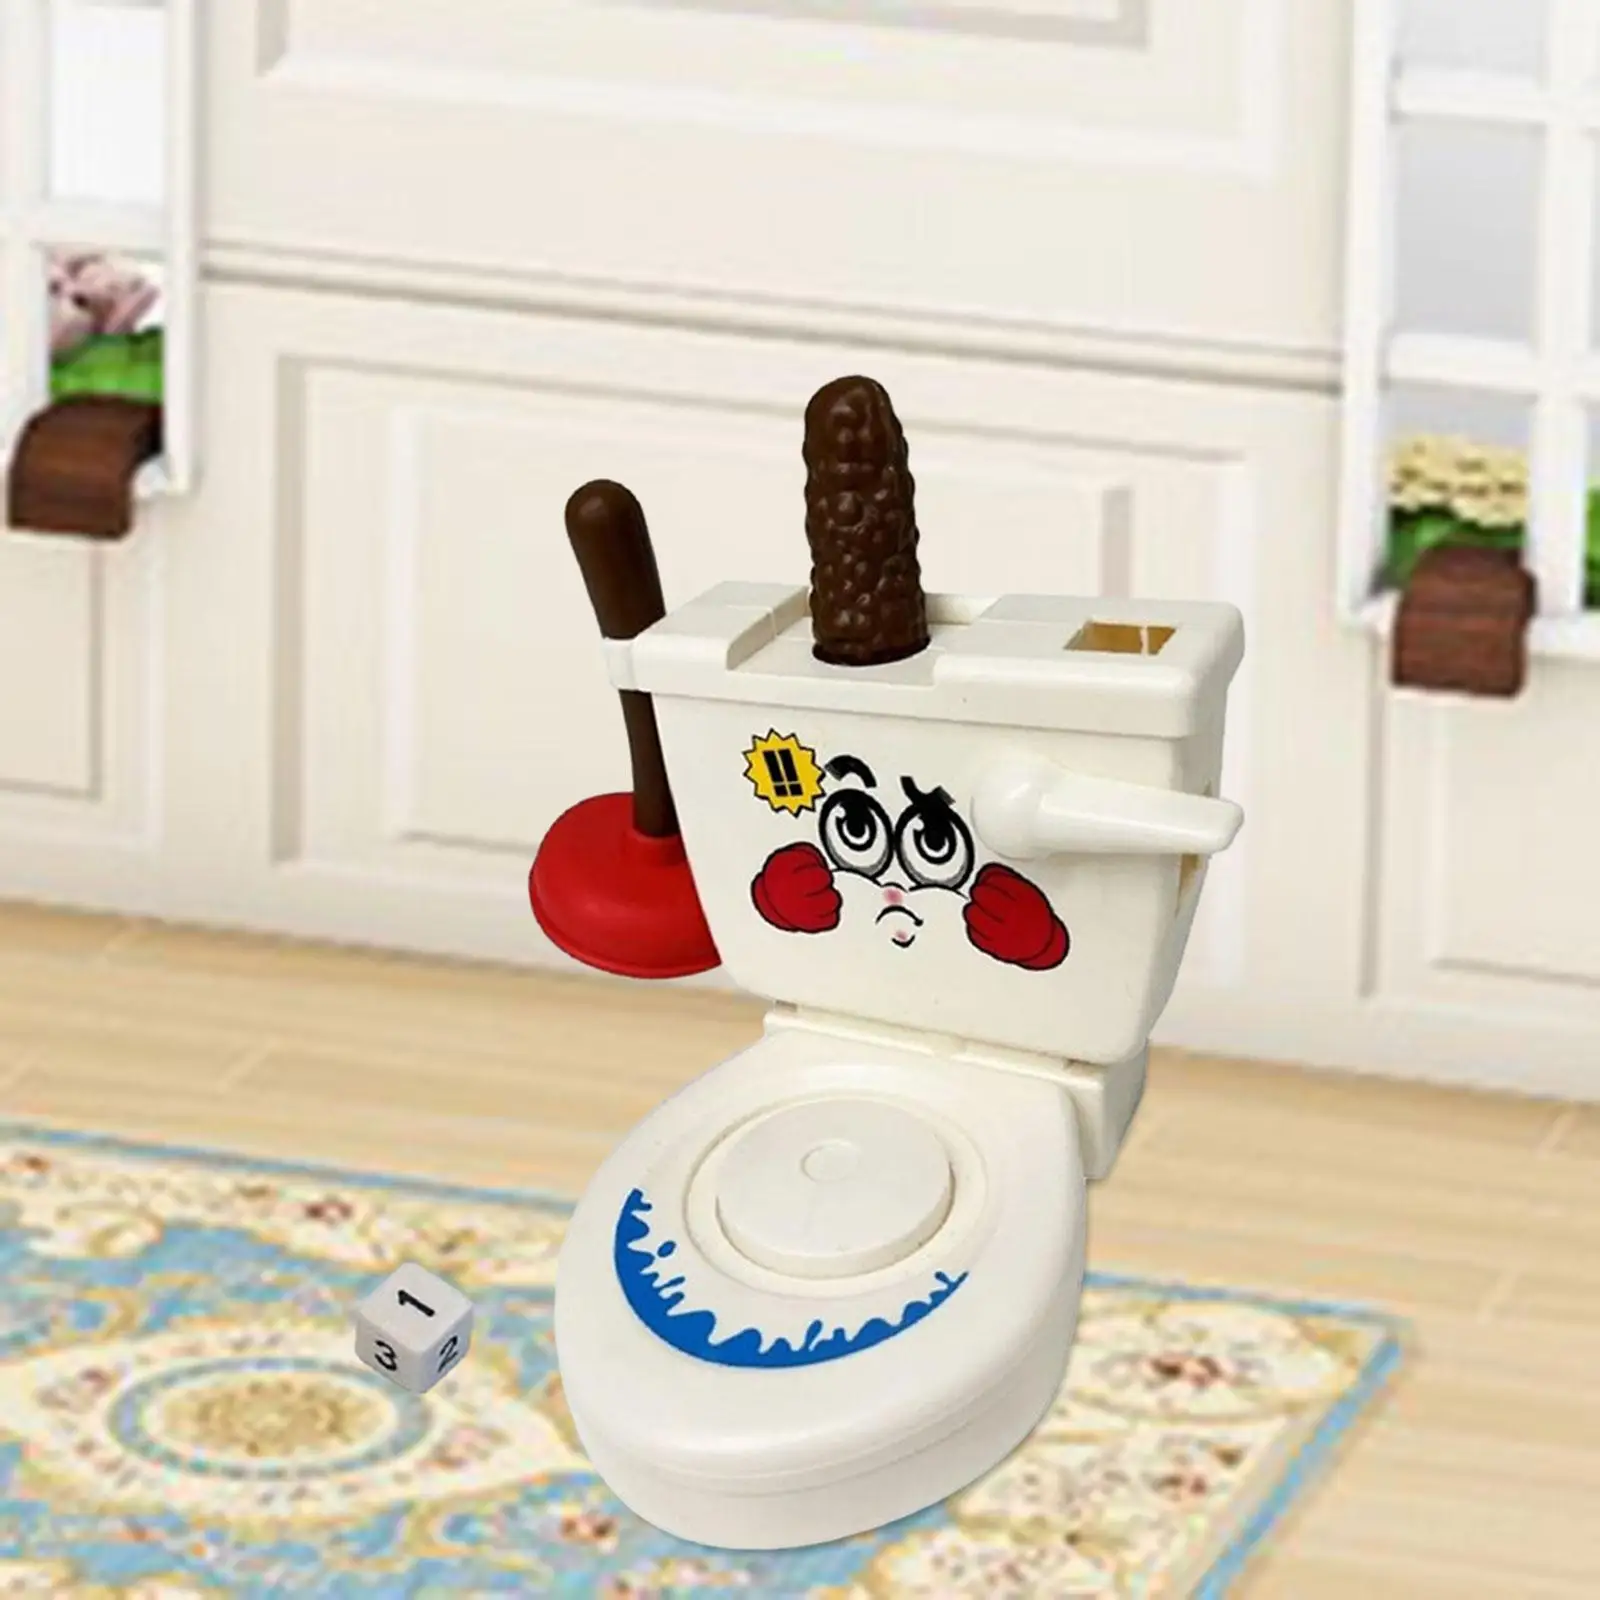 Simulation Toilet Ejection Toy Party Funny Stool Toilet Toy Toilet Toy Toilet Game Toy for Todders Girls Boys Kid Xmas Gifts